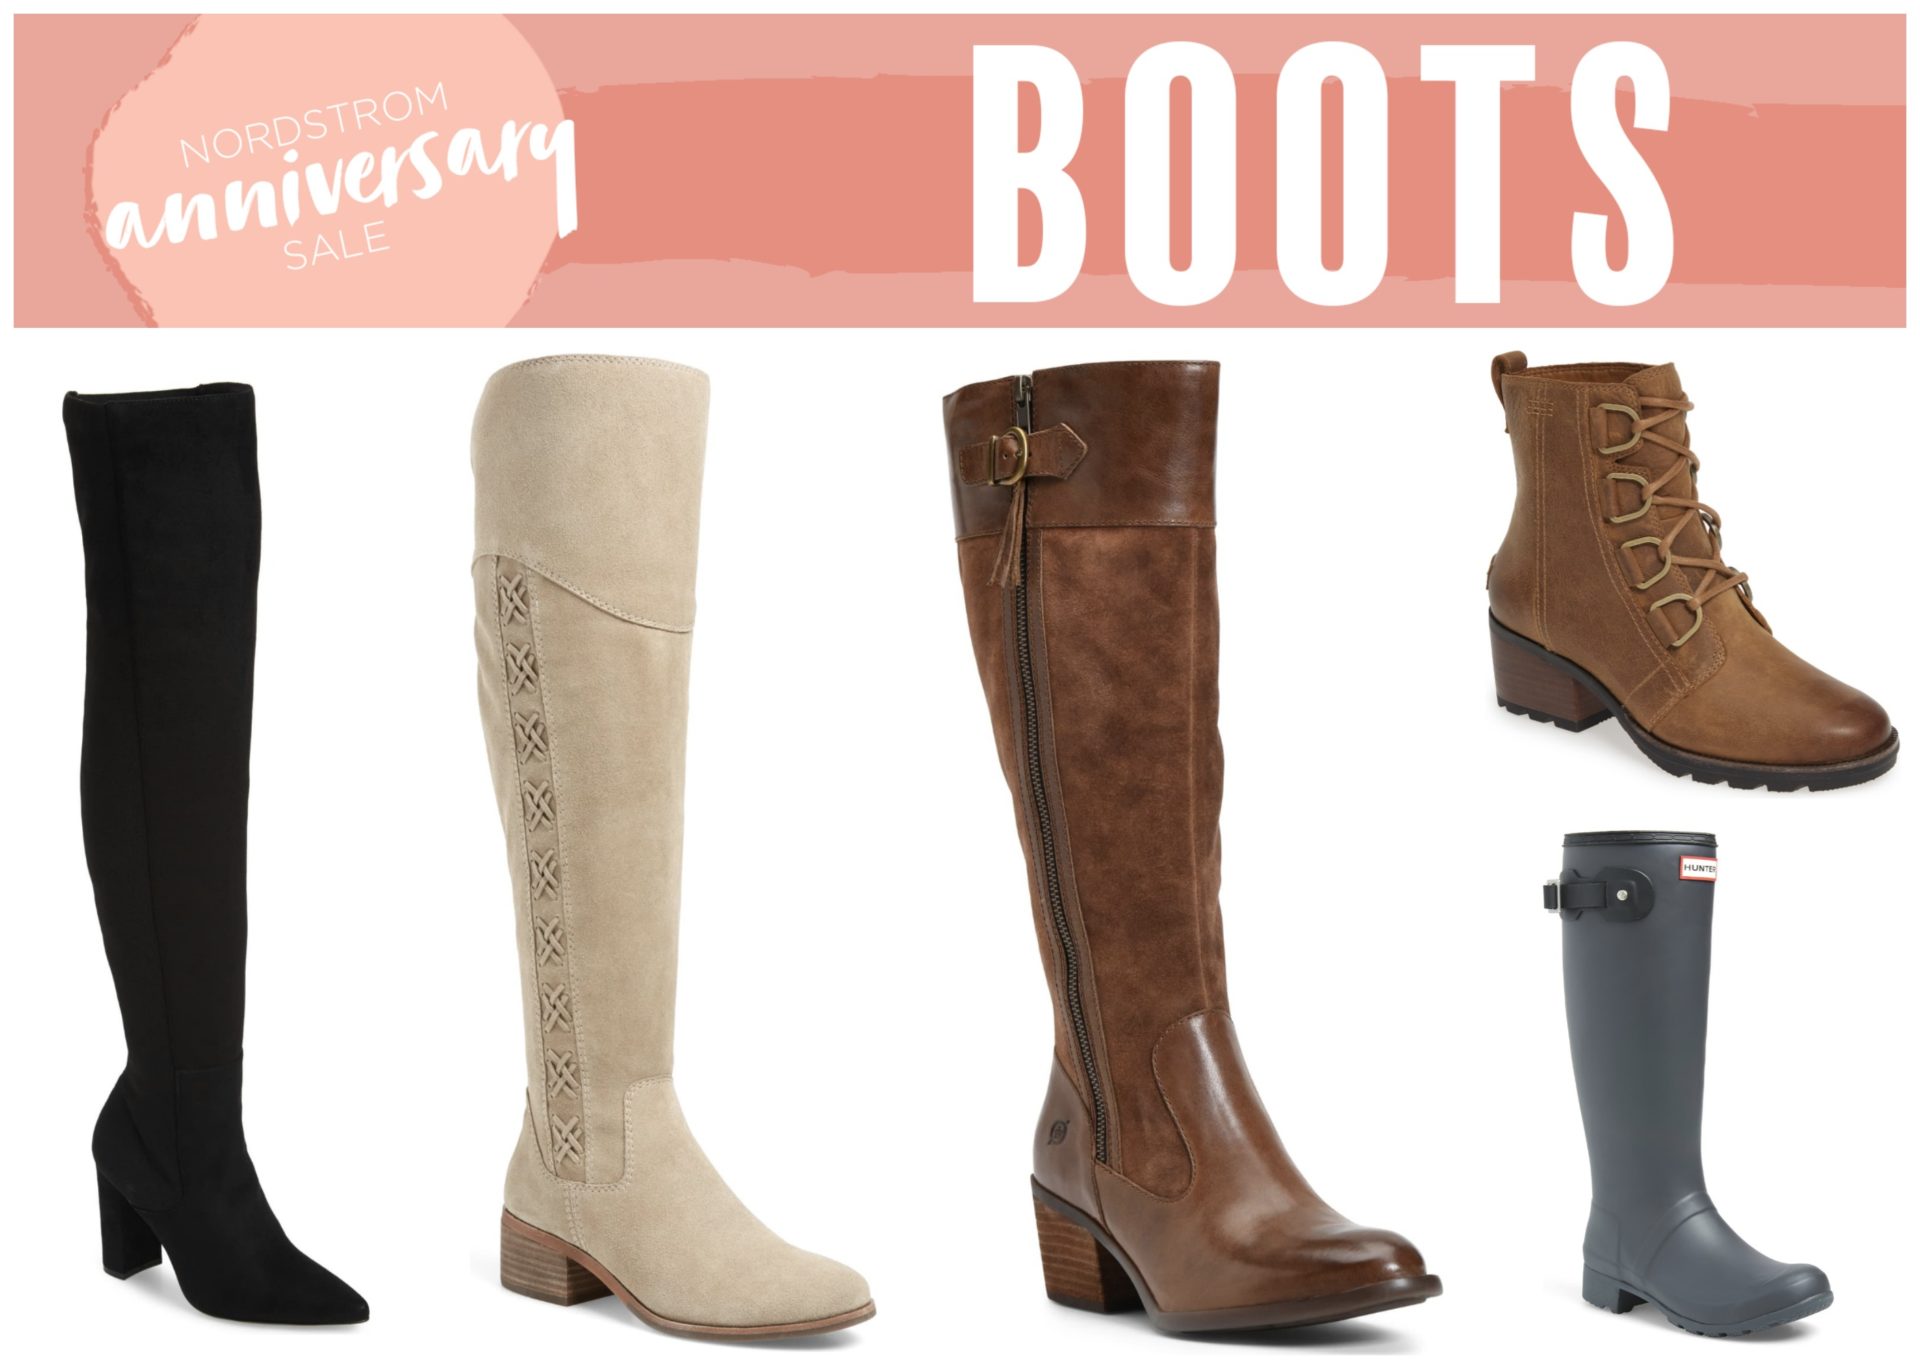 2019 Nordstrom Anniversary Sale Boots